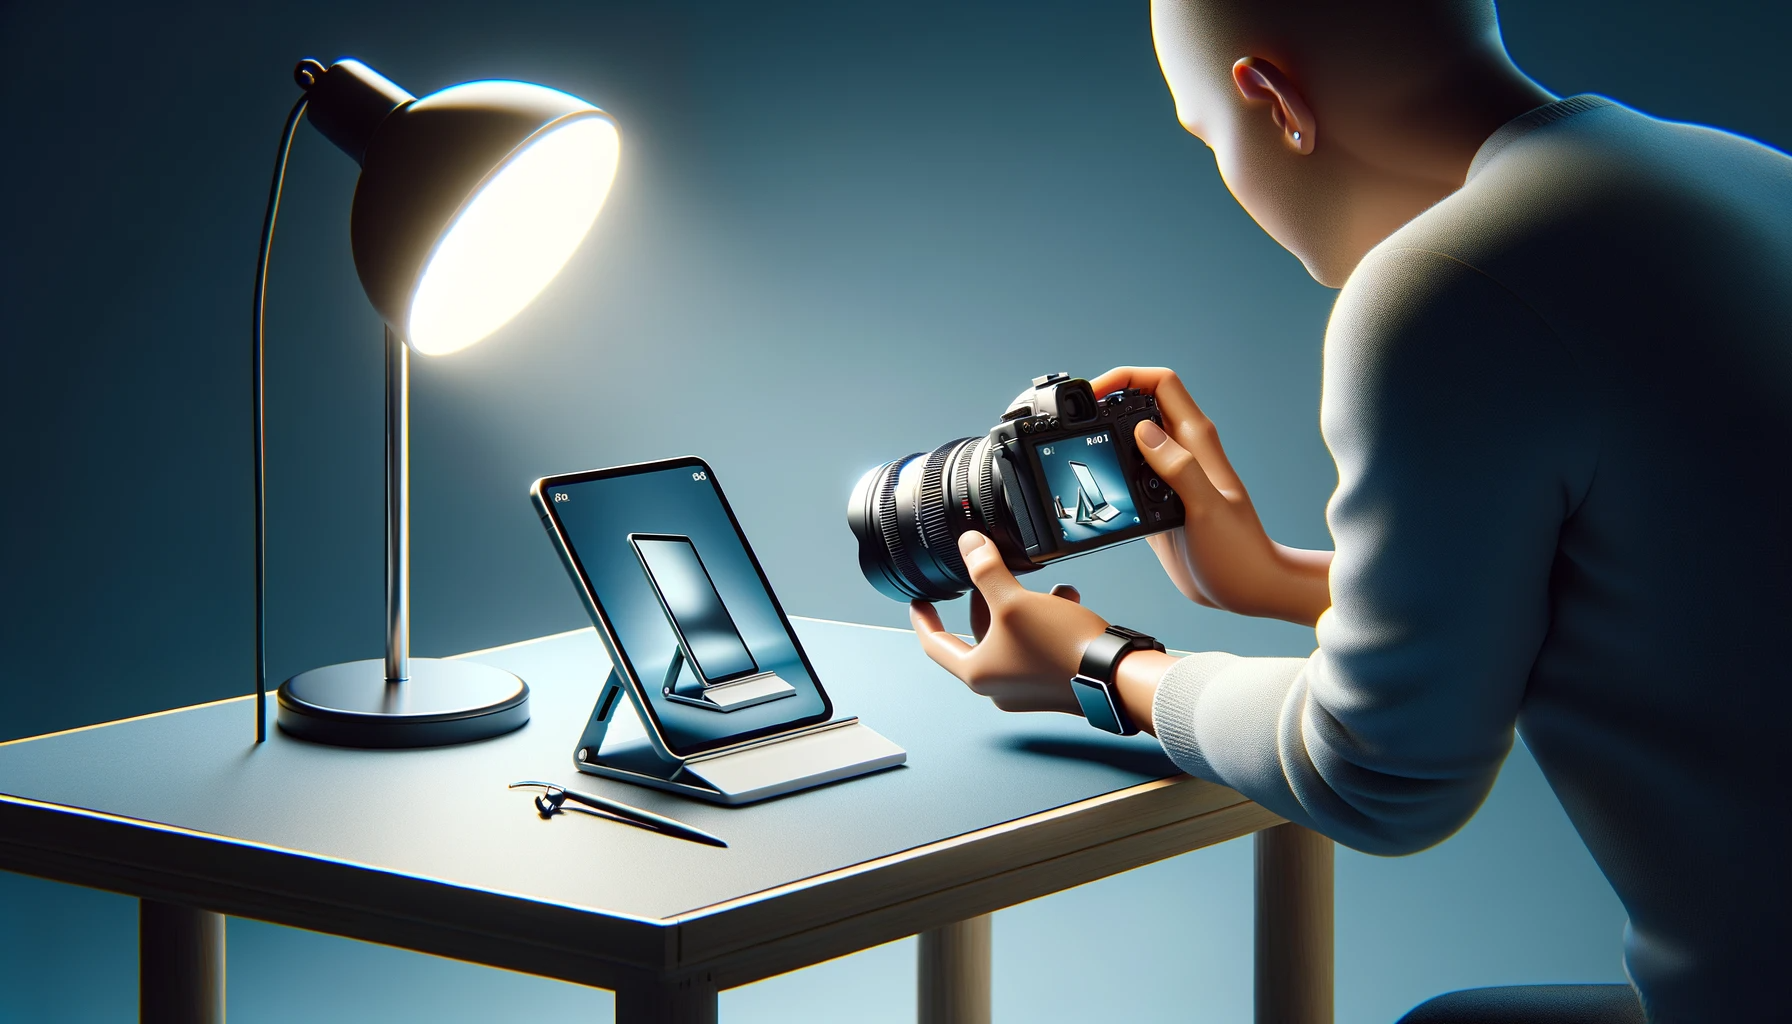 A person taking a photograph of a tablet with a professional camera, highlighting the tablet's screen and design under a bright desk lamp.